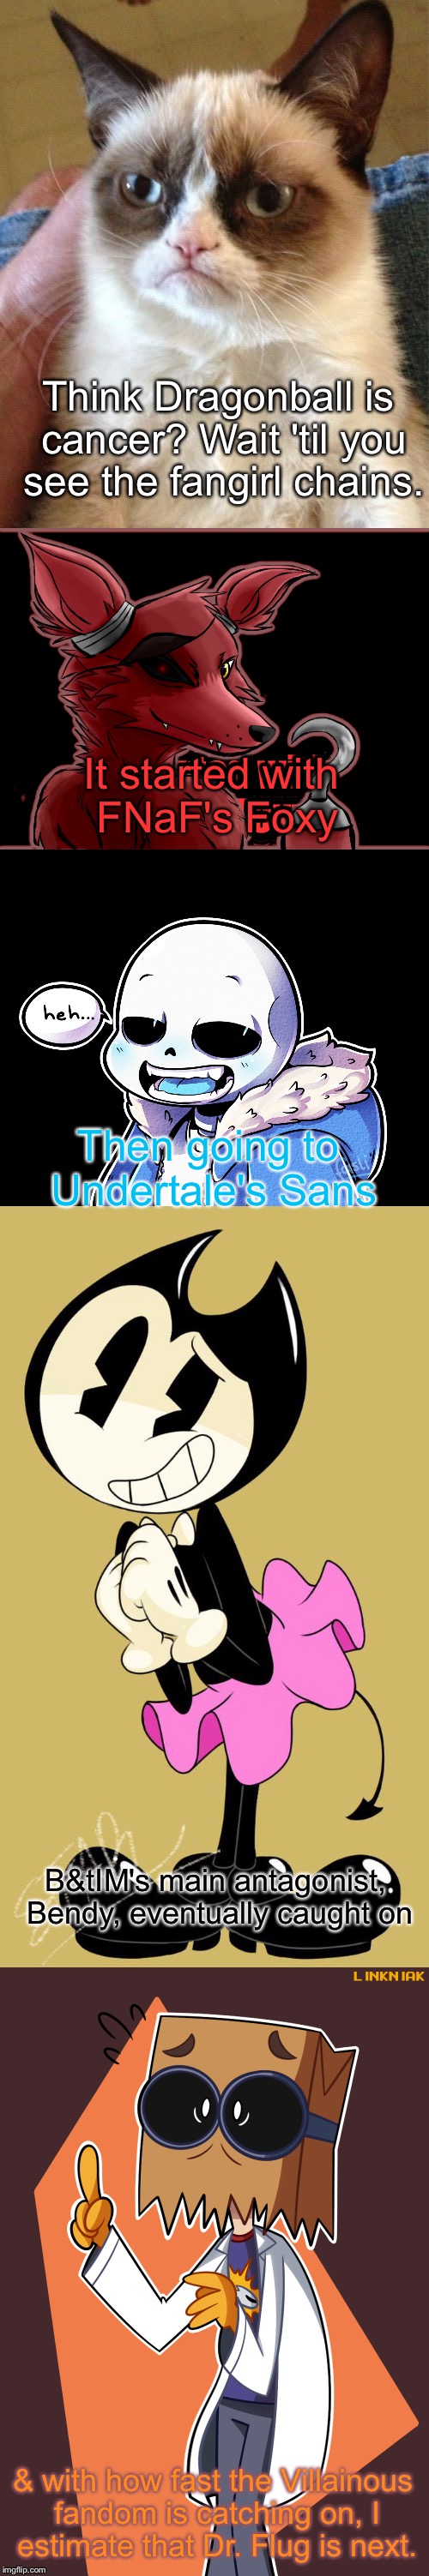 I've been studying this chain for quite a while now | Think Dragonball is cancer? Wait 'til you see the fangirl chains. It started with FNaF's Foxy Then going to Undertale's Sans B&tIM's main an | image tagged in memes,grumpy cat,video games,cartoons | made w/ Imgflip meme maker